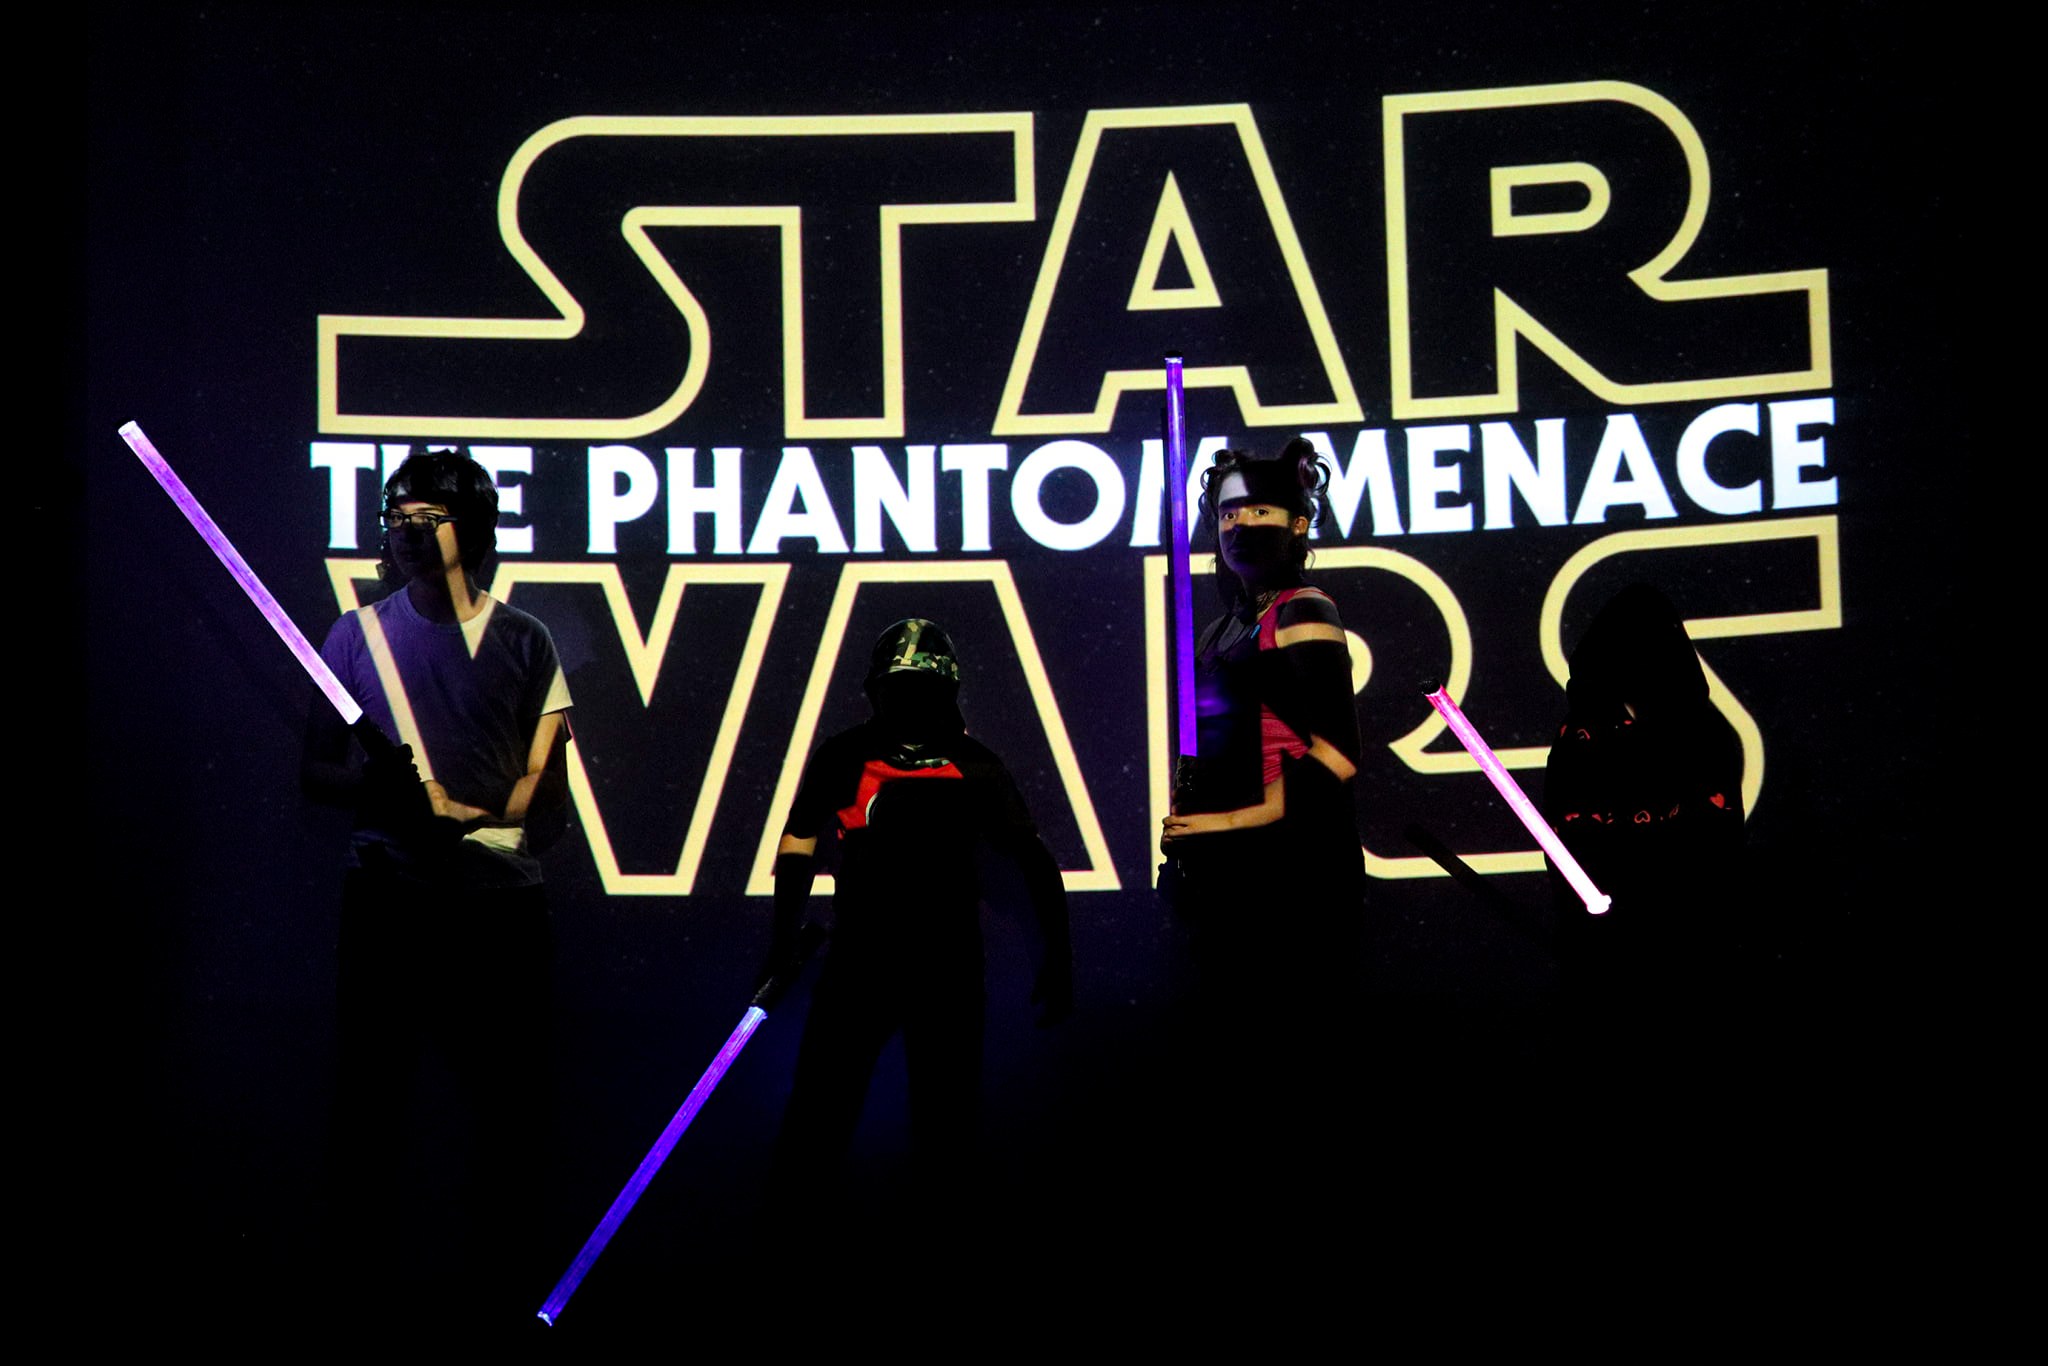 4 tweens stand in front of an illuminated logo of Star Wars Episode 1 while brandishing lightsabers in a defensive position